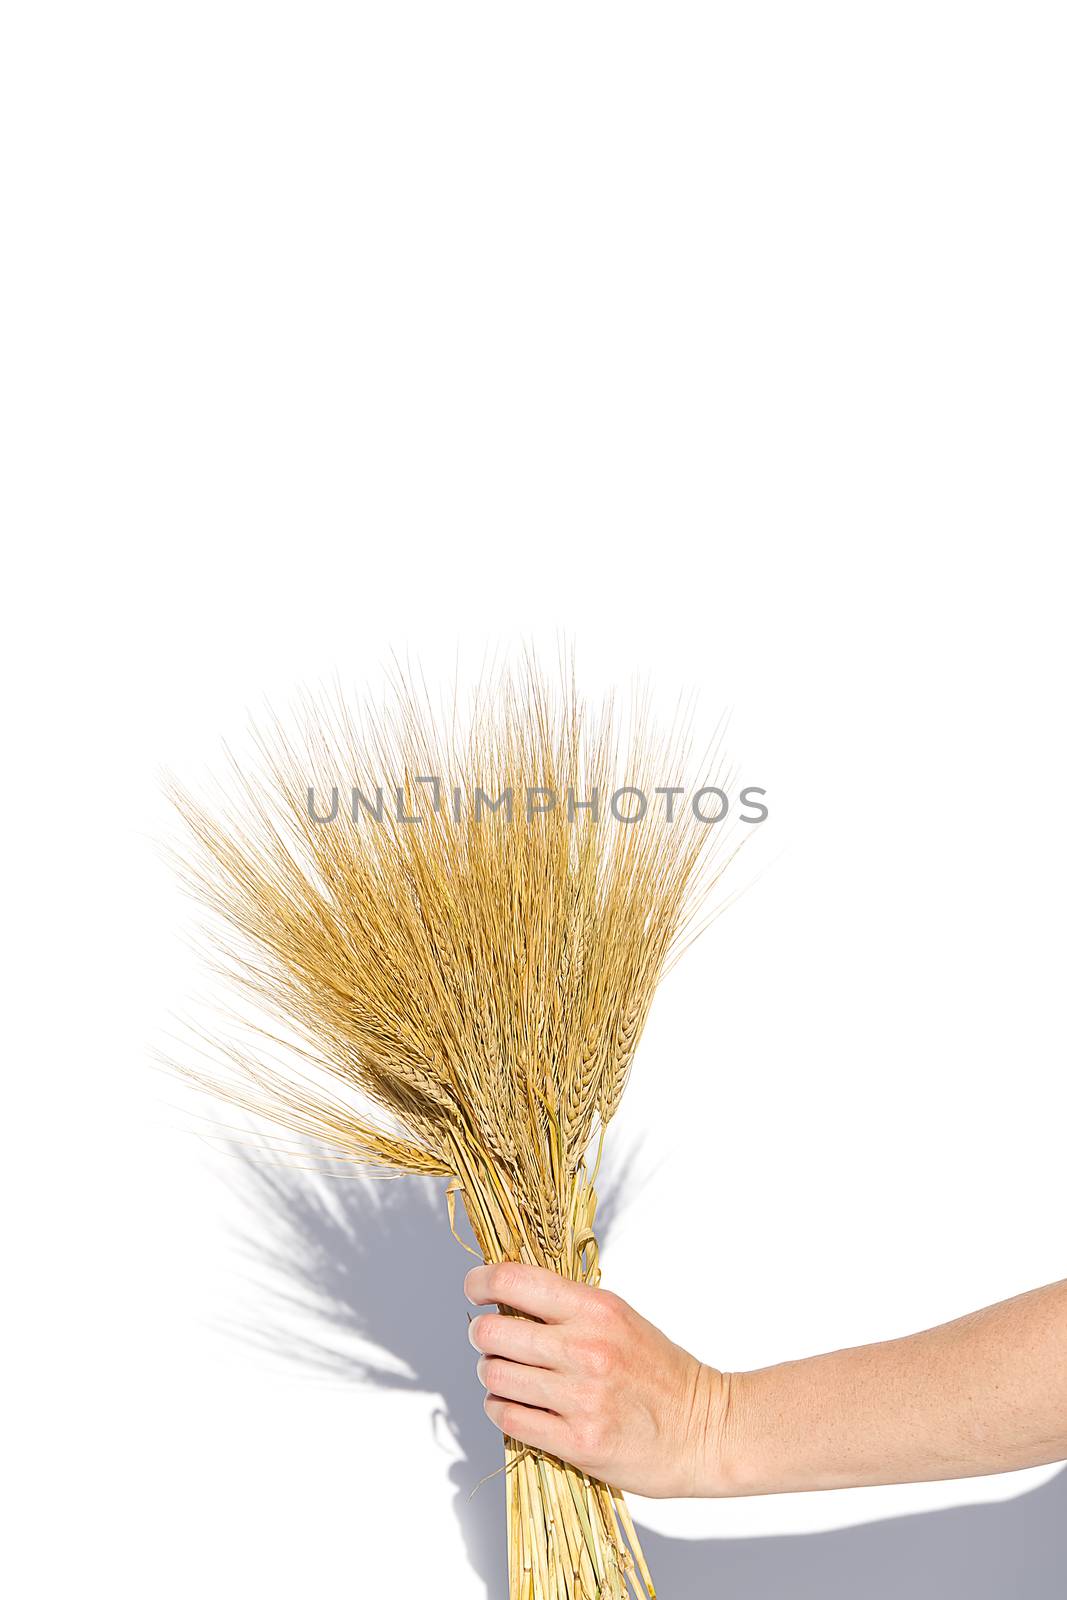 woman hand hold wheat ears isolated on the white background with copy space. by PhotoTime